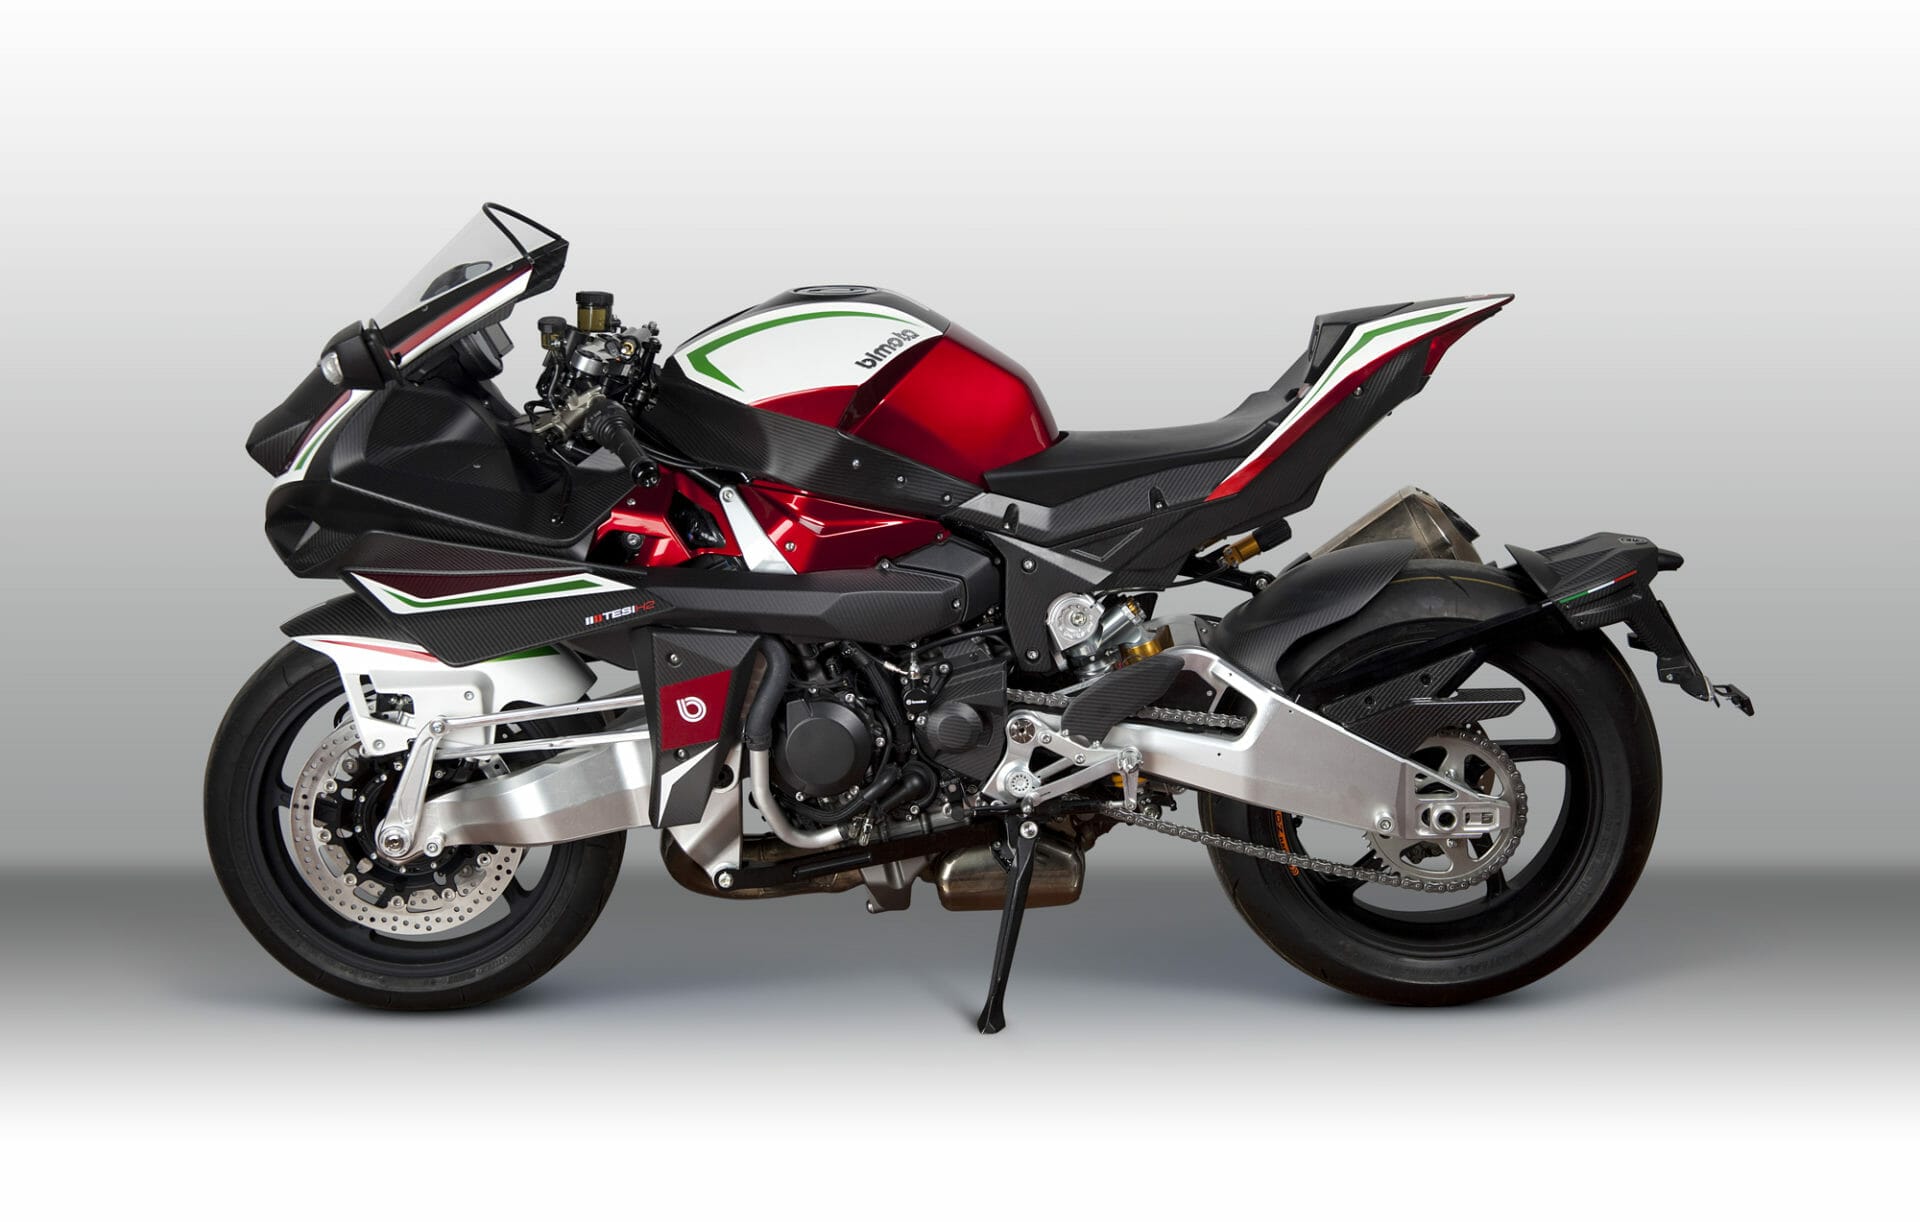 Bimota Tesi H2 in final form - data, price etc.
- also in the App MOTORCYCLE NEWS